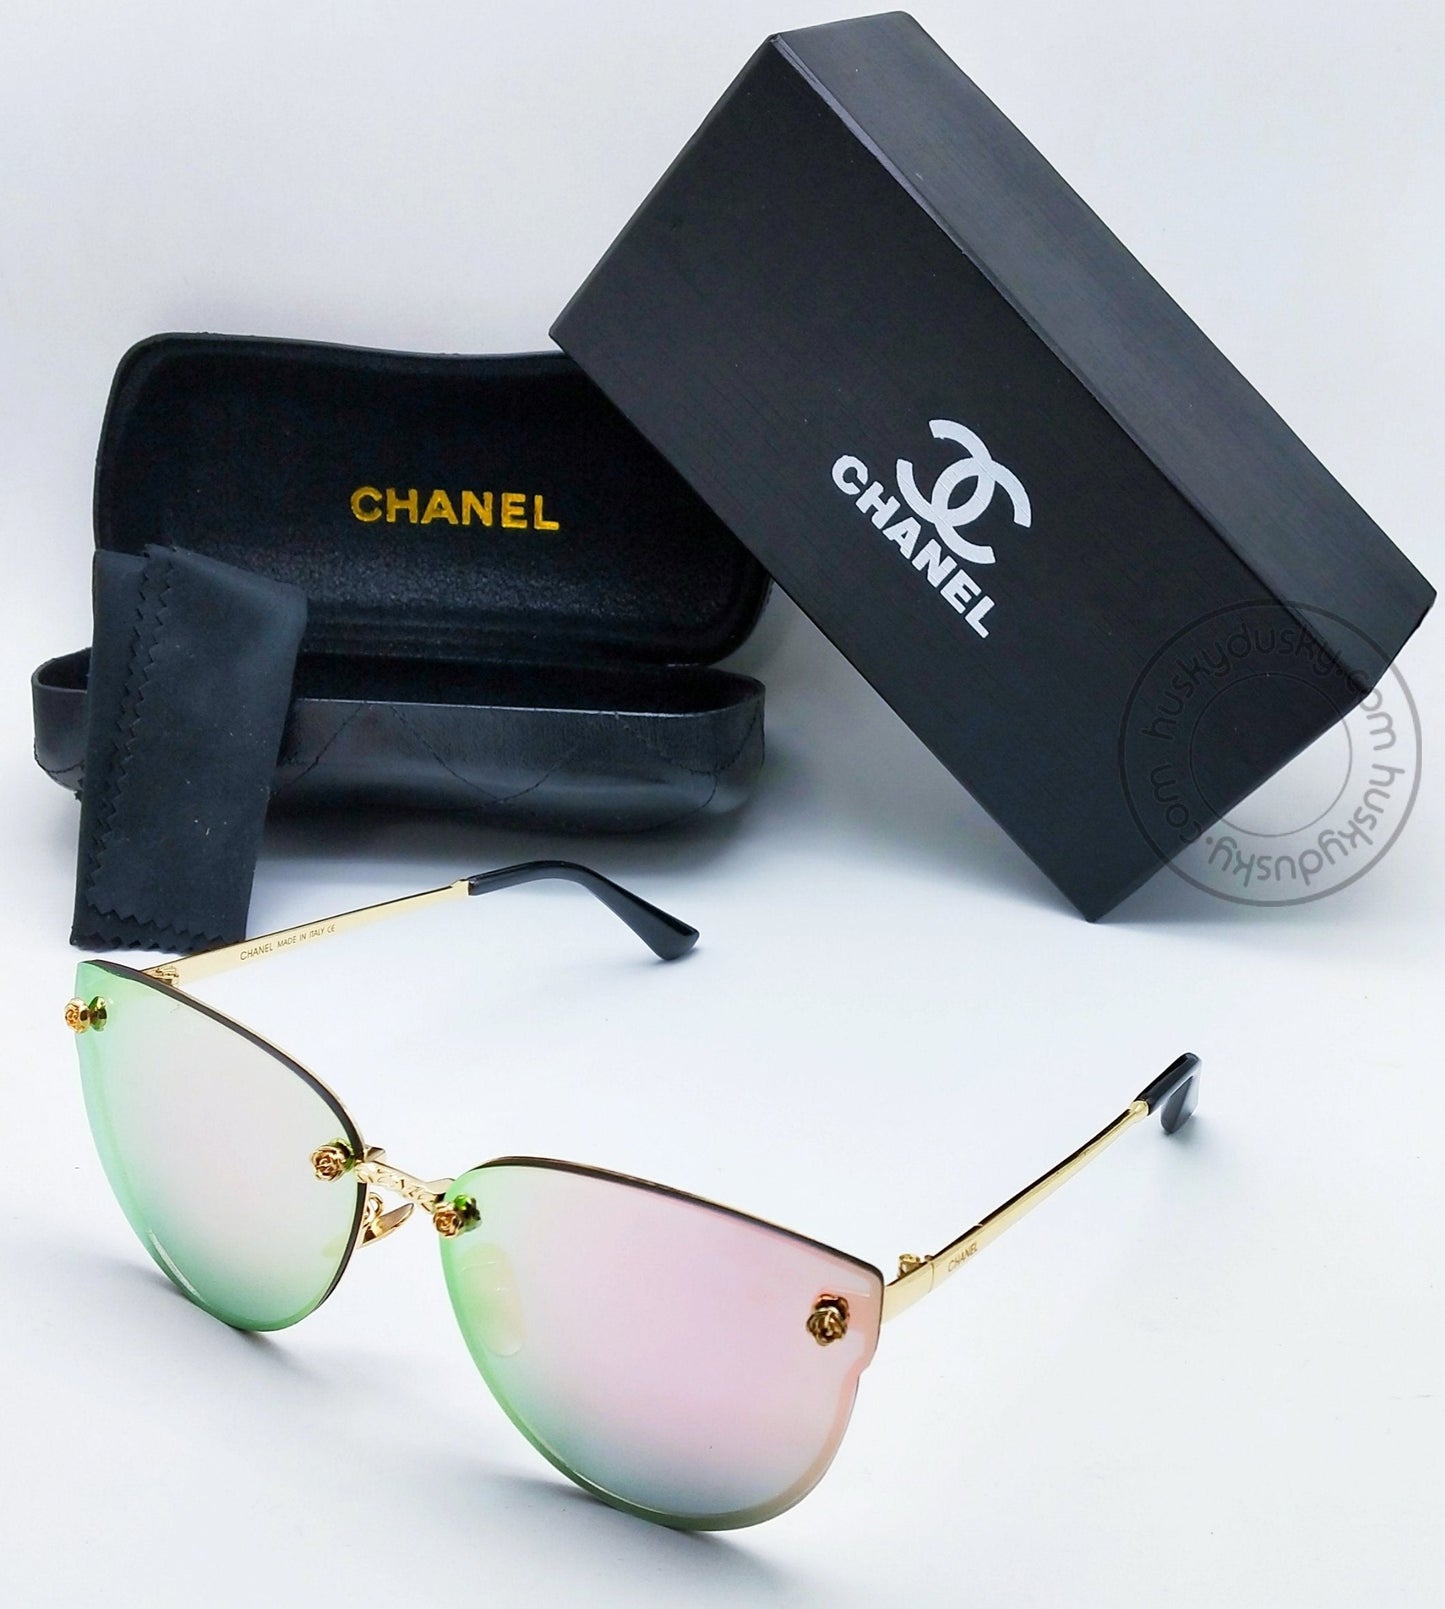 Chanel Branded Multi Color Green&Pink Glass Men's Women's Sunglass For Man Woman or Girl CHA-91 Gold And Black Design Stick Gift Sunglass